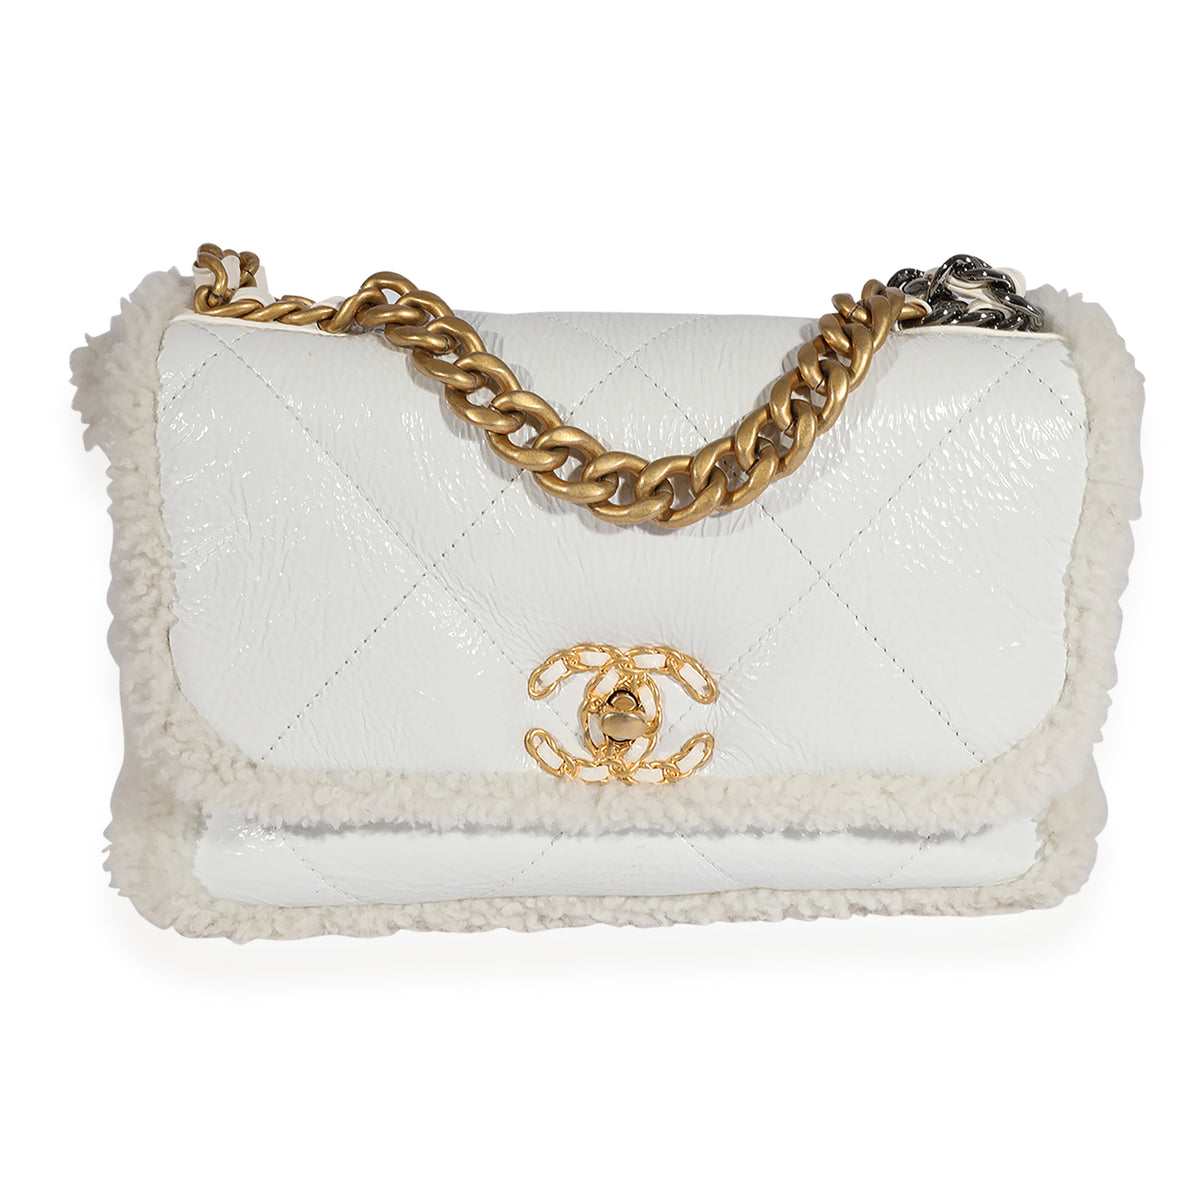 Chanel White Patent Leather & Shearling Chanel 19 Medium Flap Bag